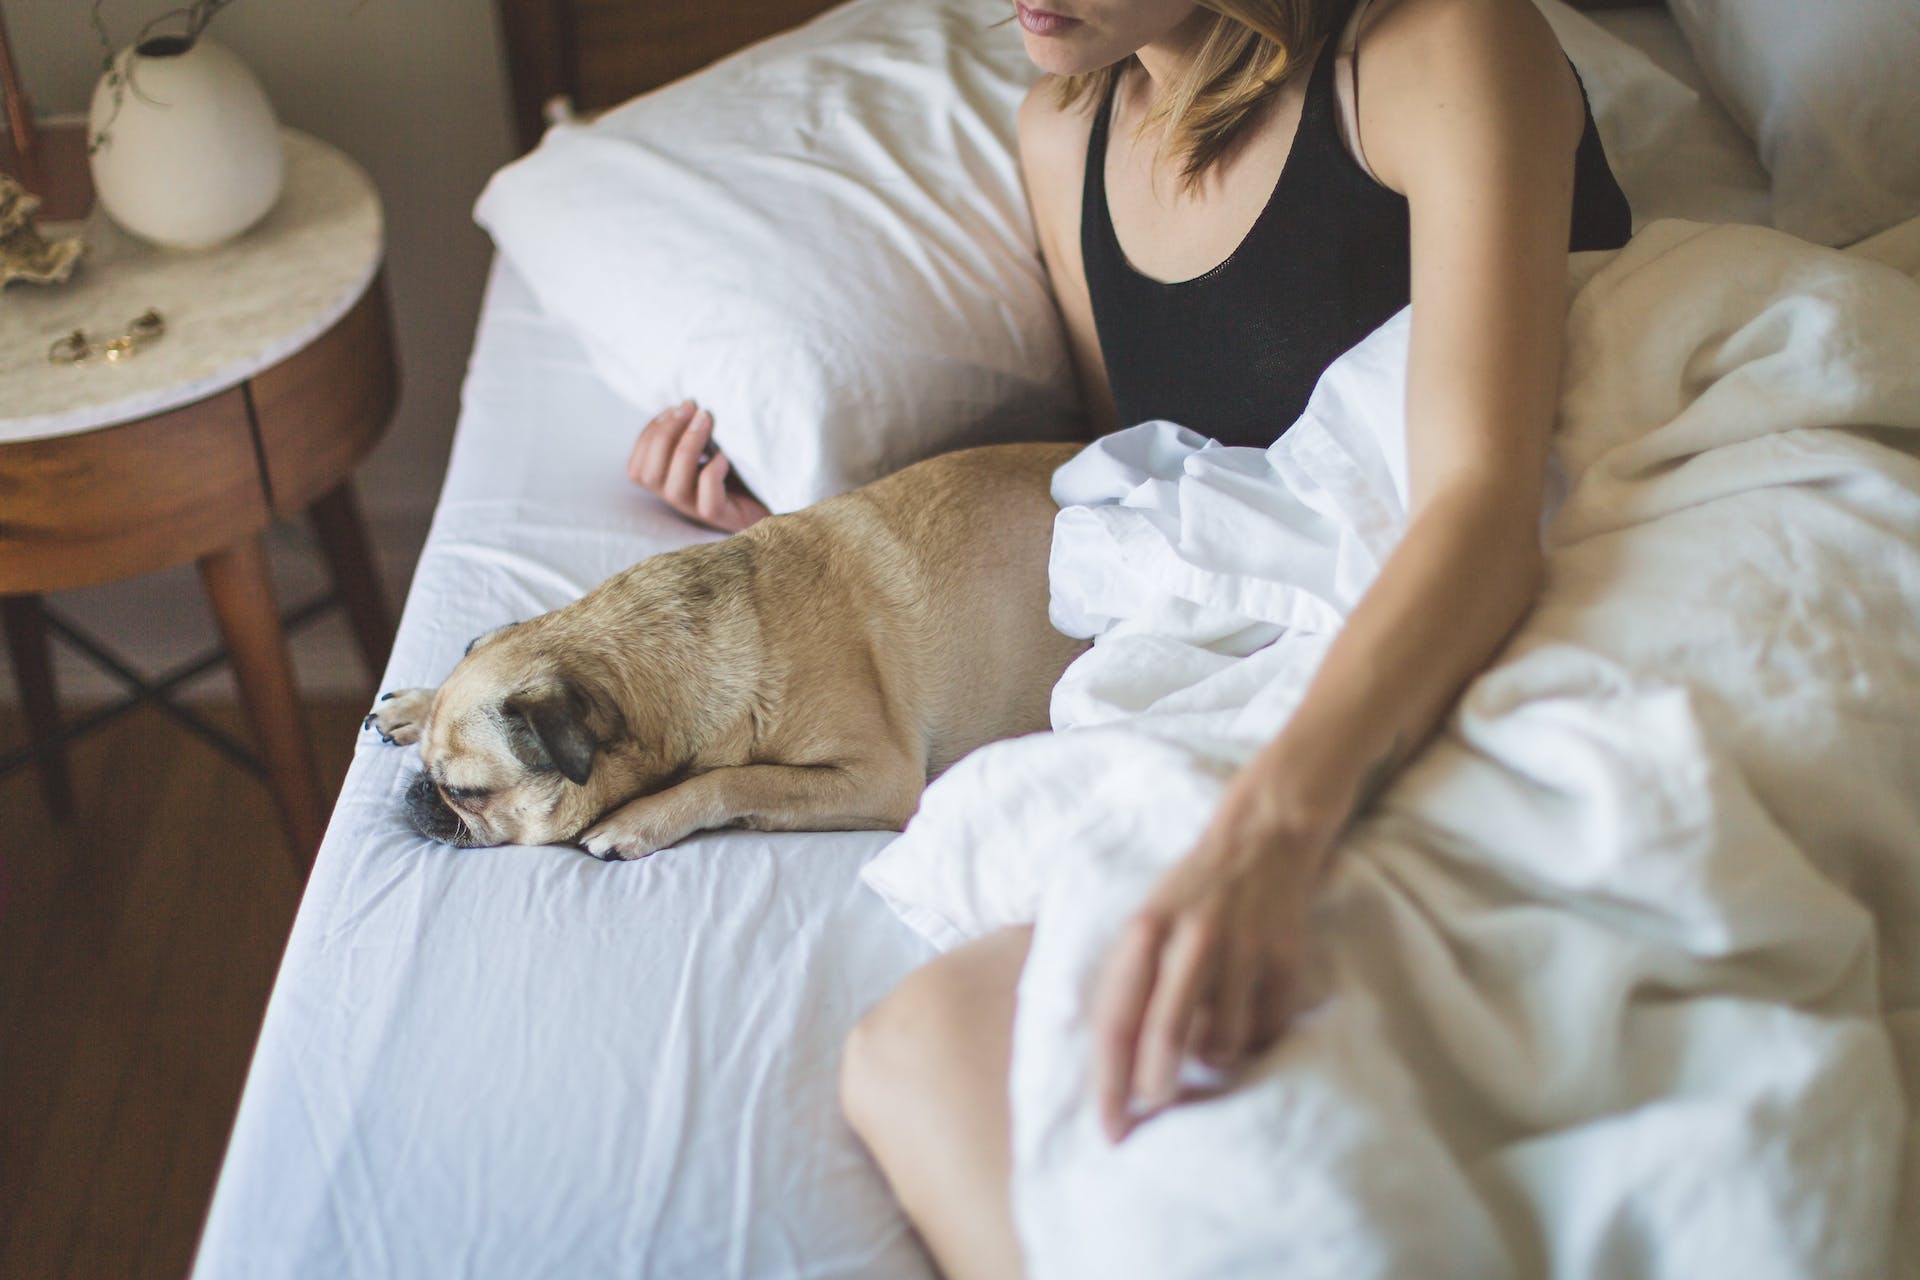 Woman and dog in bed | Source: Pexels